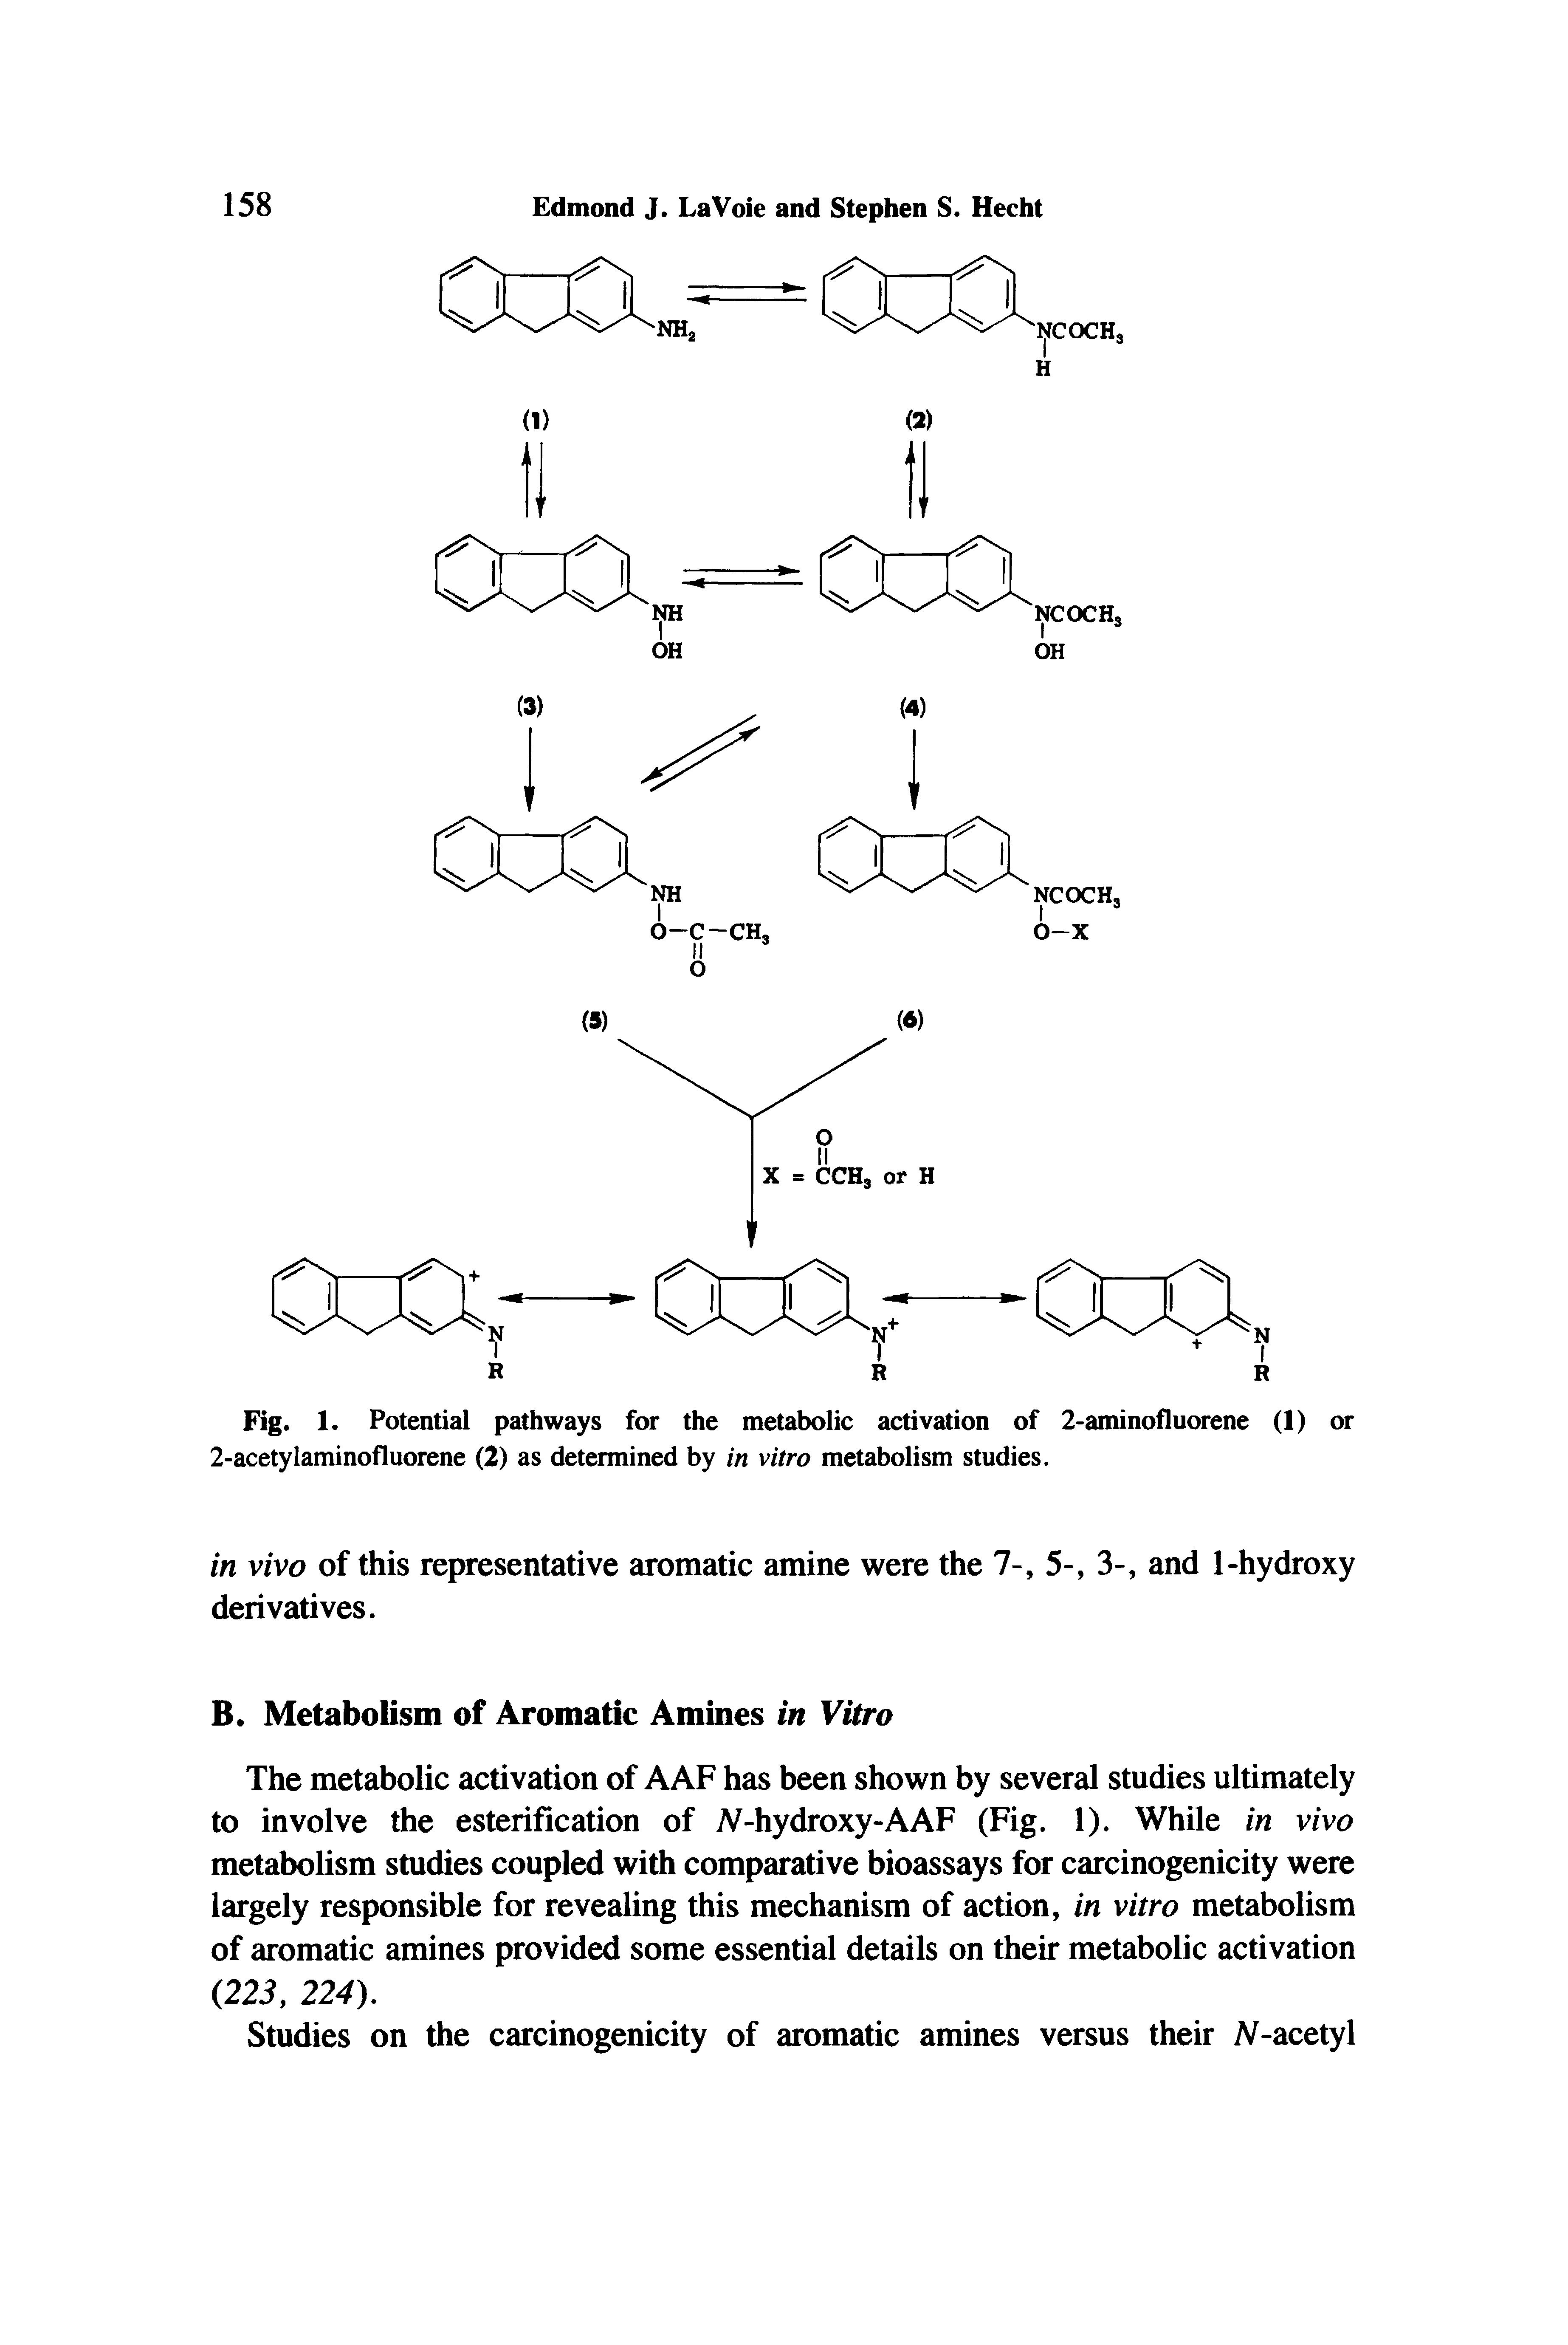 Fig. 1. Potential pathways for the metabolic activation of 2-aminofluorene (1) or 2-acetylaminofluorene (2) as determined by in vitro metabolism studies.